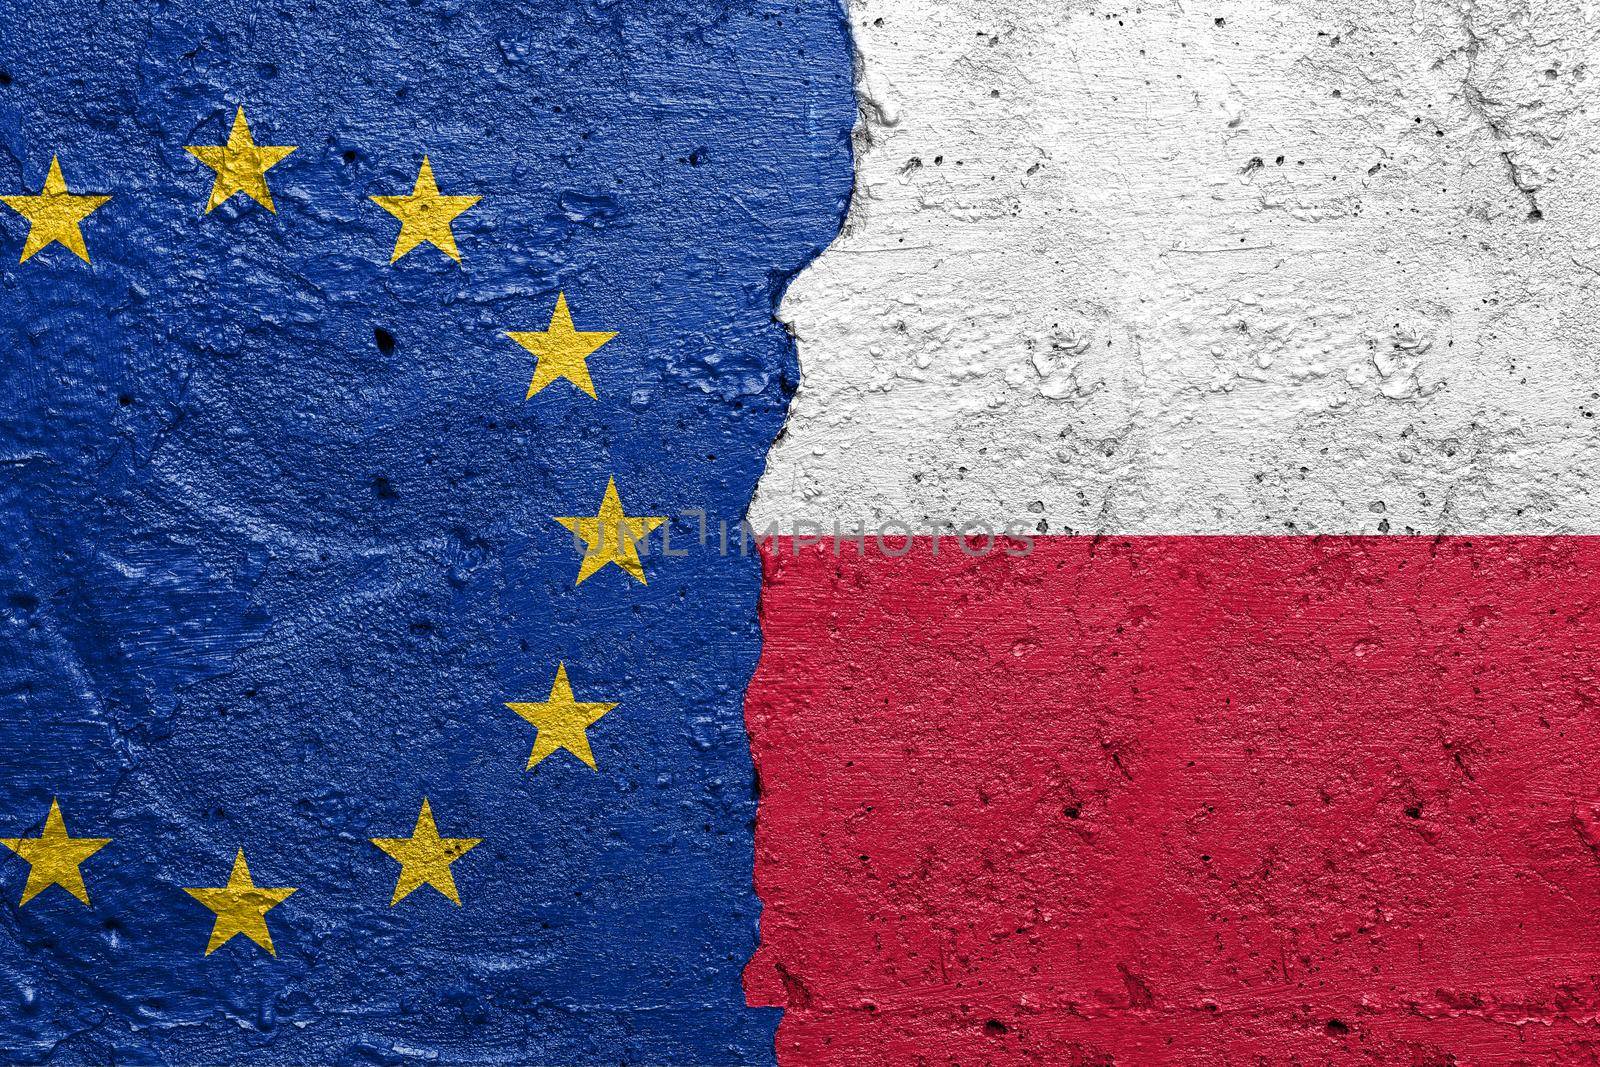 European Union and Poland - Cracked concrete wall painted with a EU flag on the left and a Polish flag on the right stock photo by adamr